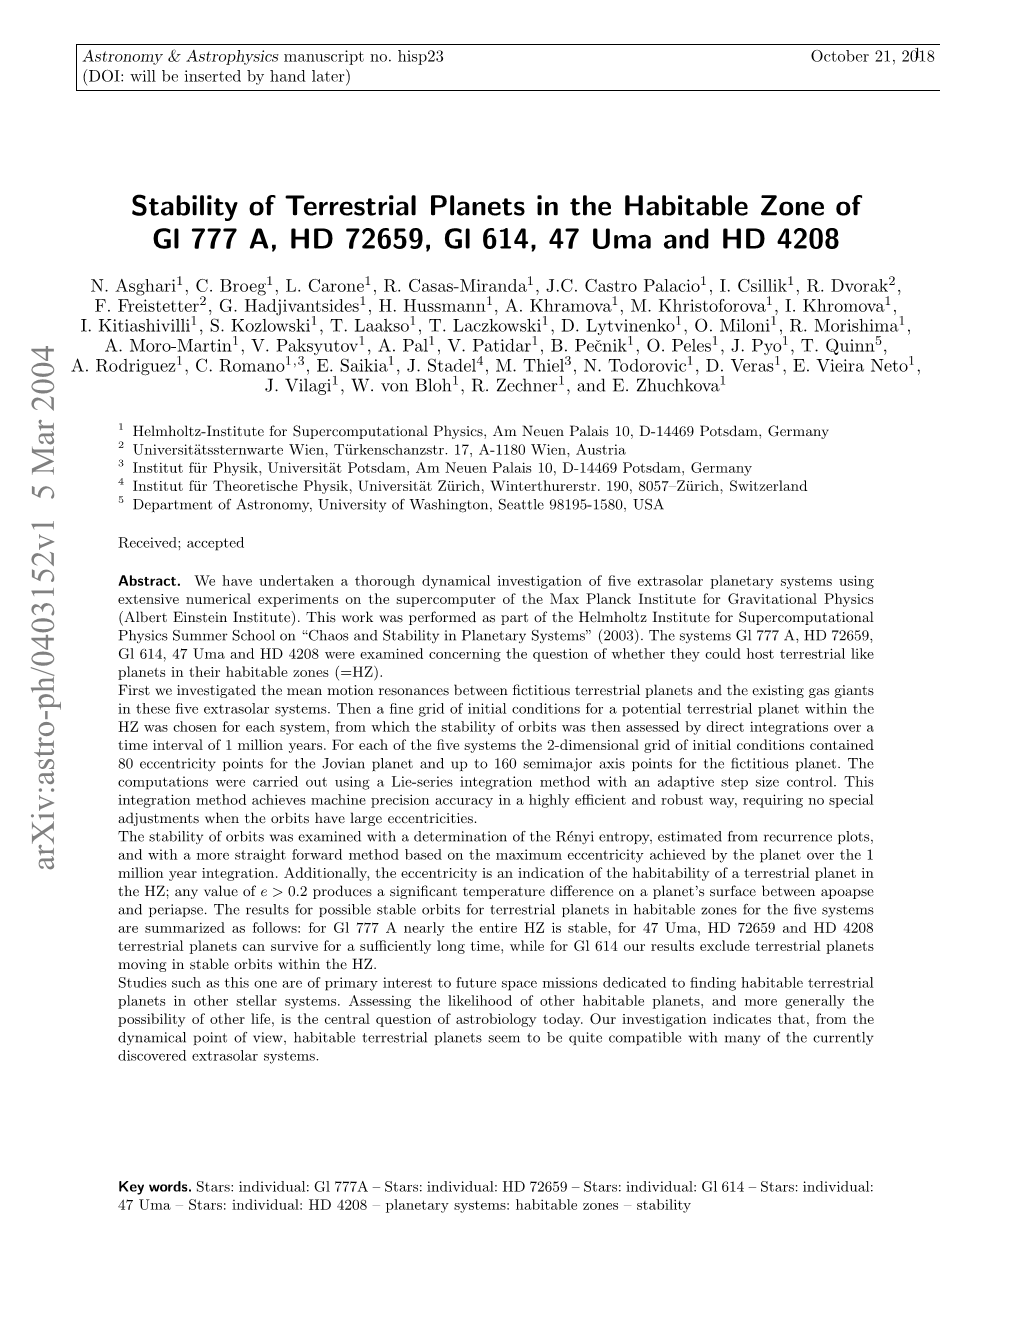 Stability of Terrestrial Planets in the Habitable Zone of Gl 777 A, HD